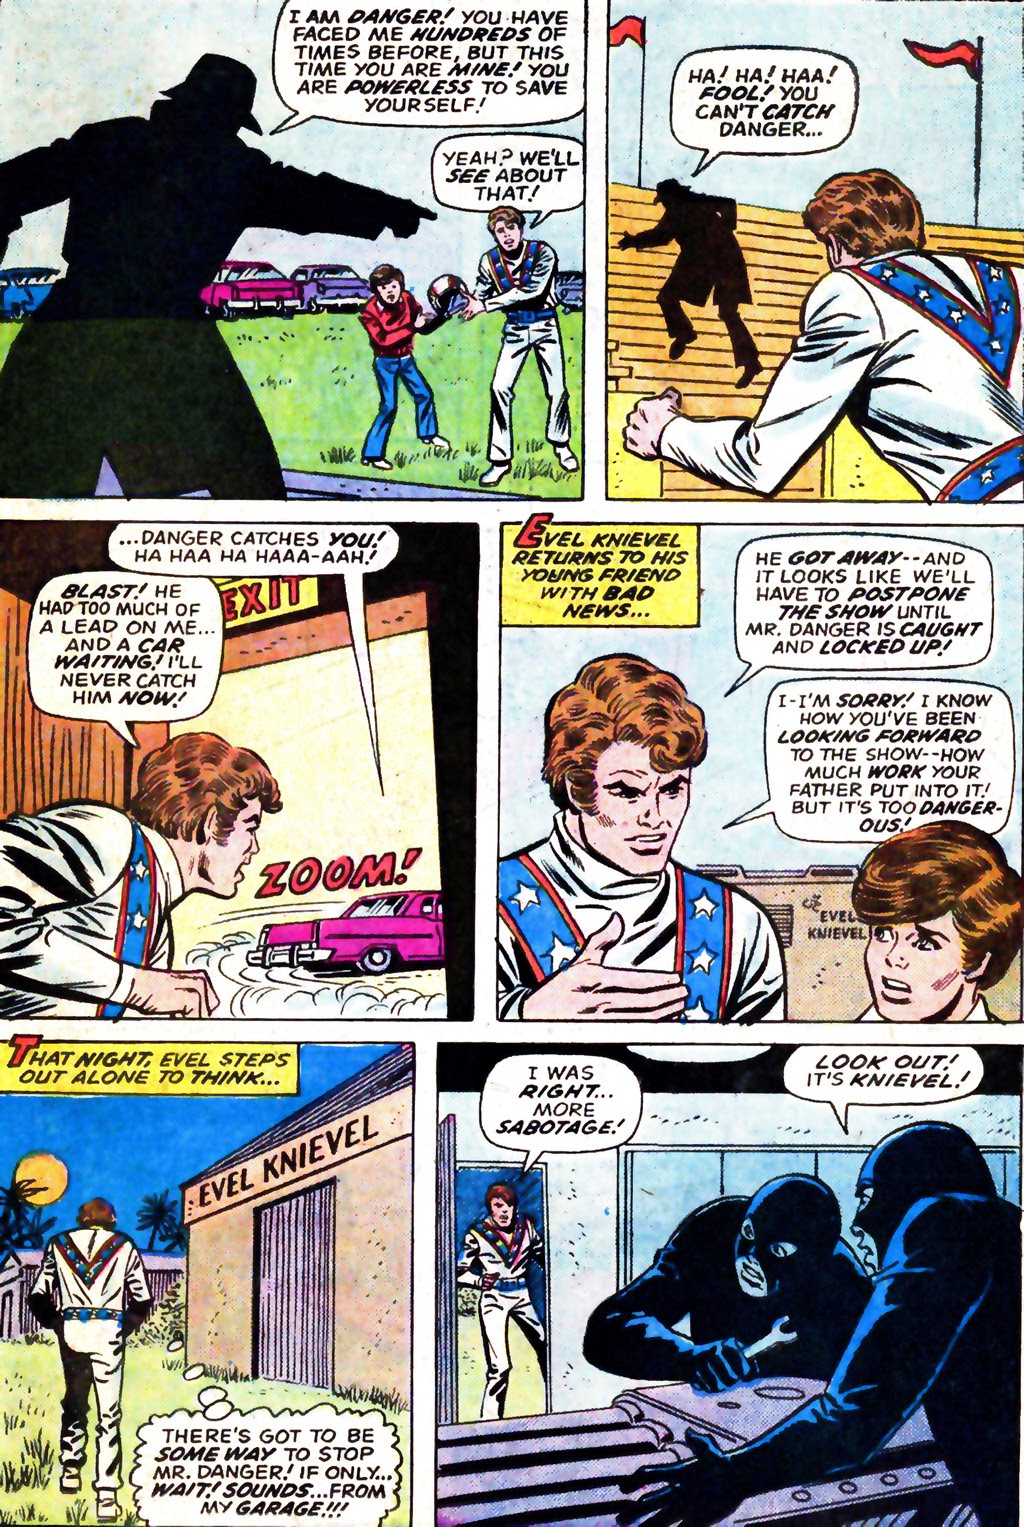 Read online Evel Knievel comic -  Issue # Full - 11